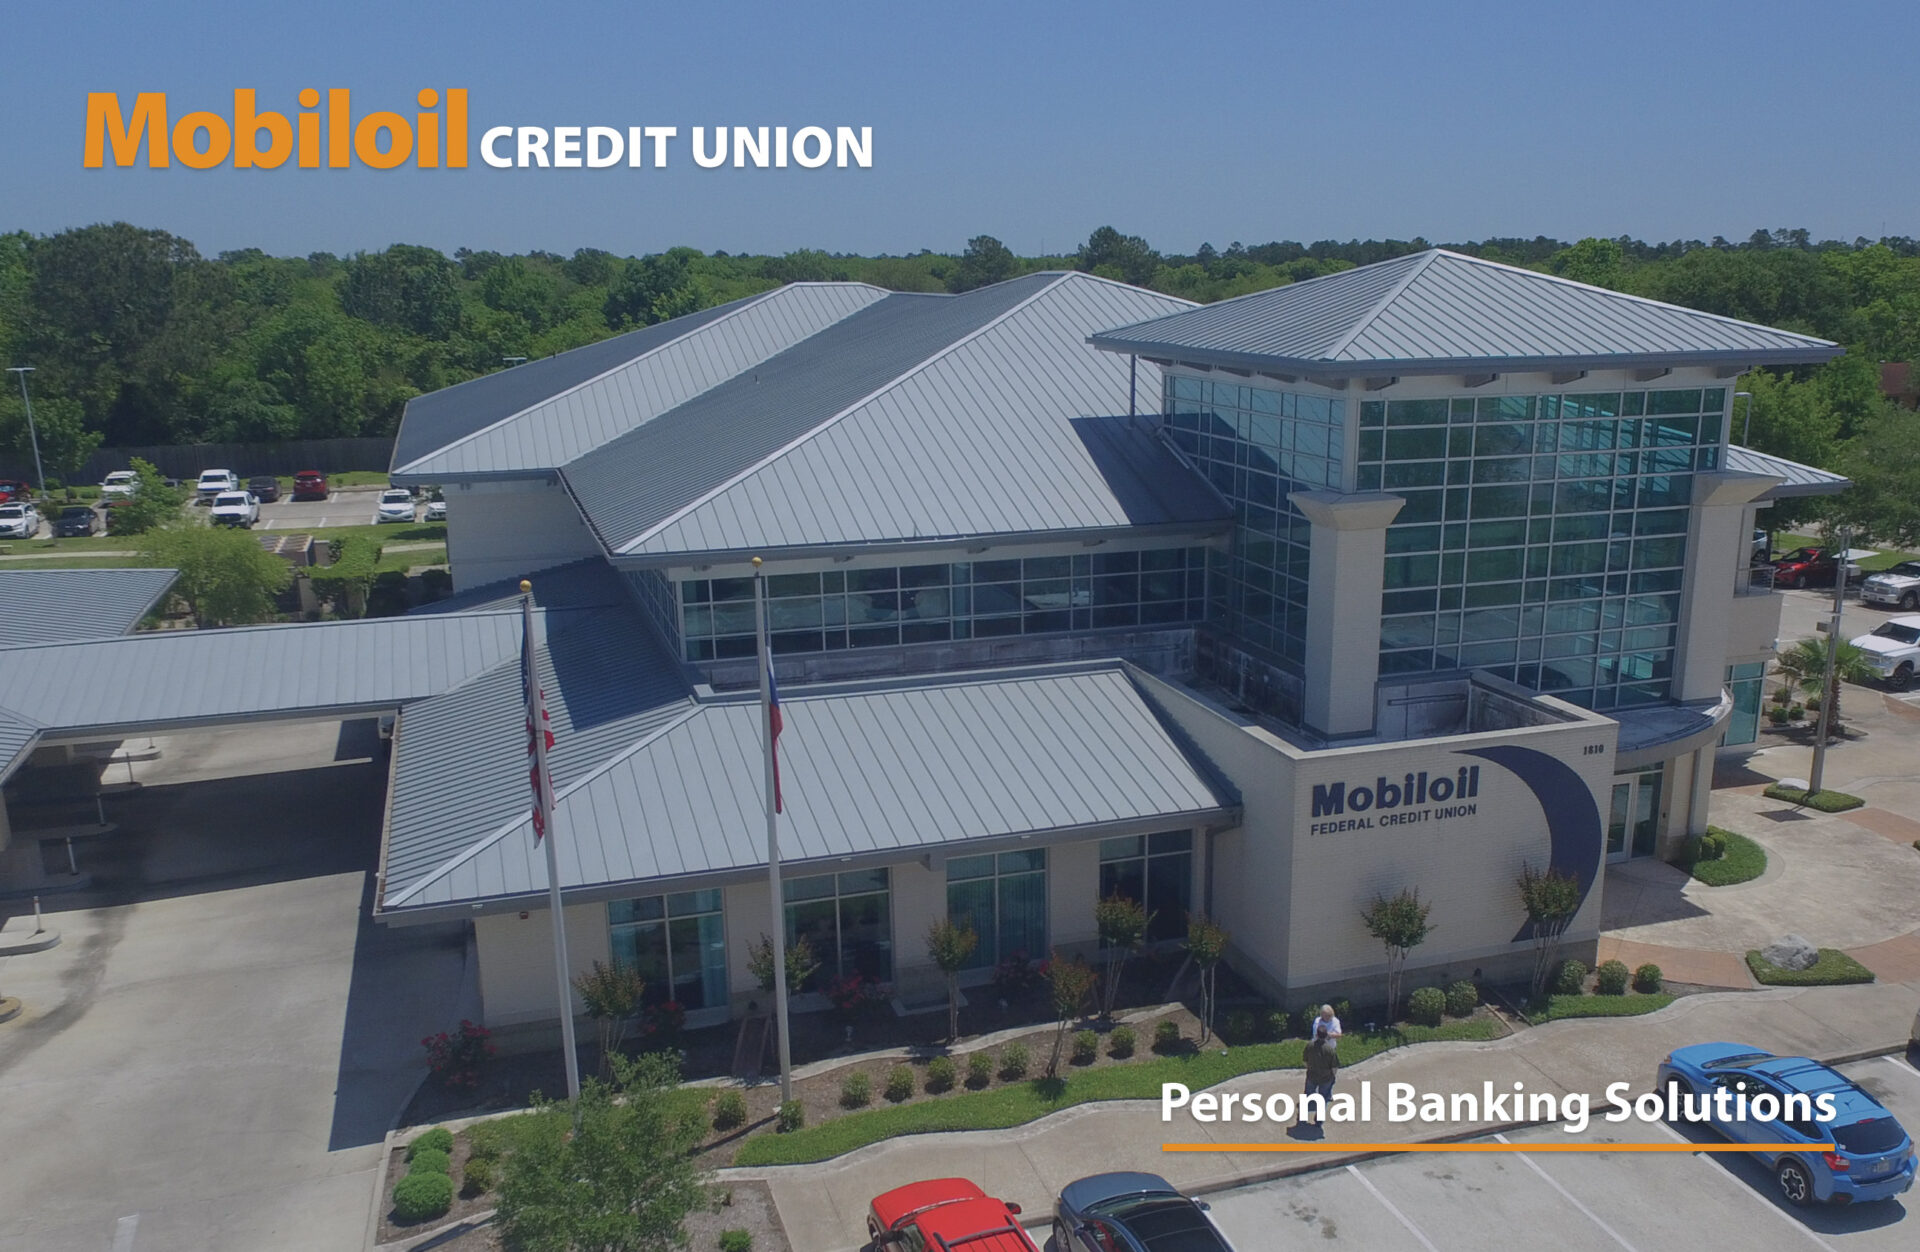 Personal Services Book Cover - Exterior image of Mobiloil Credit Union experience center